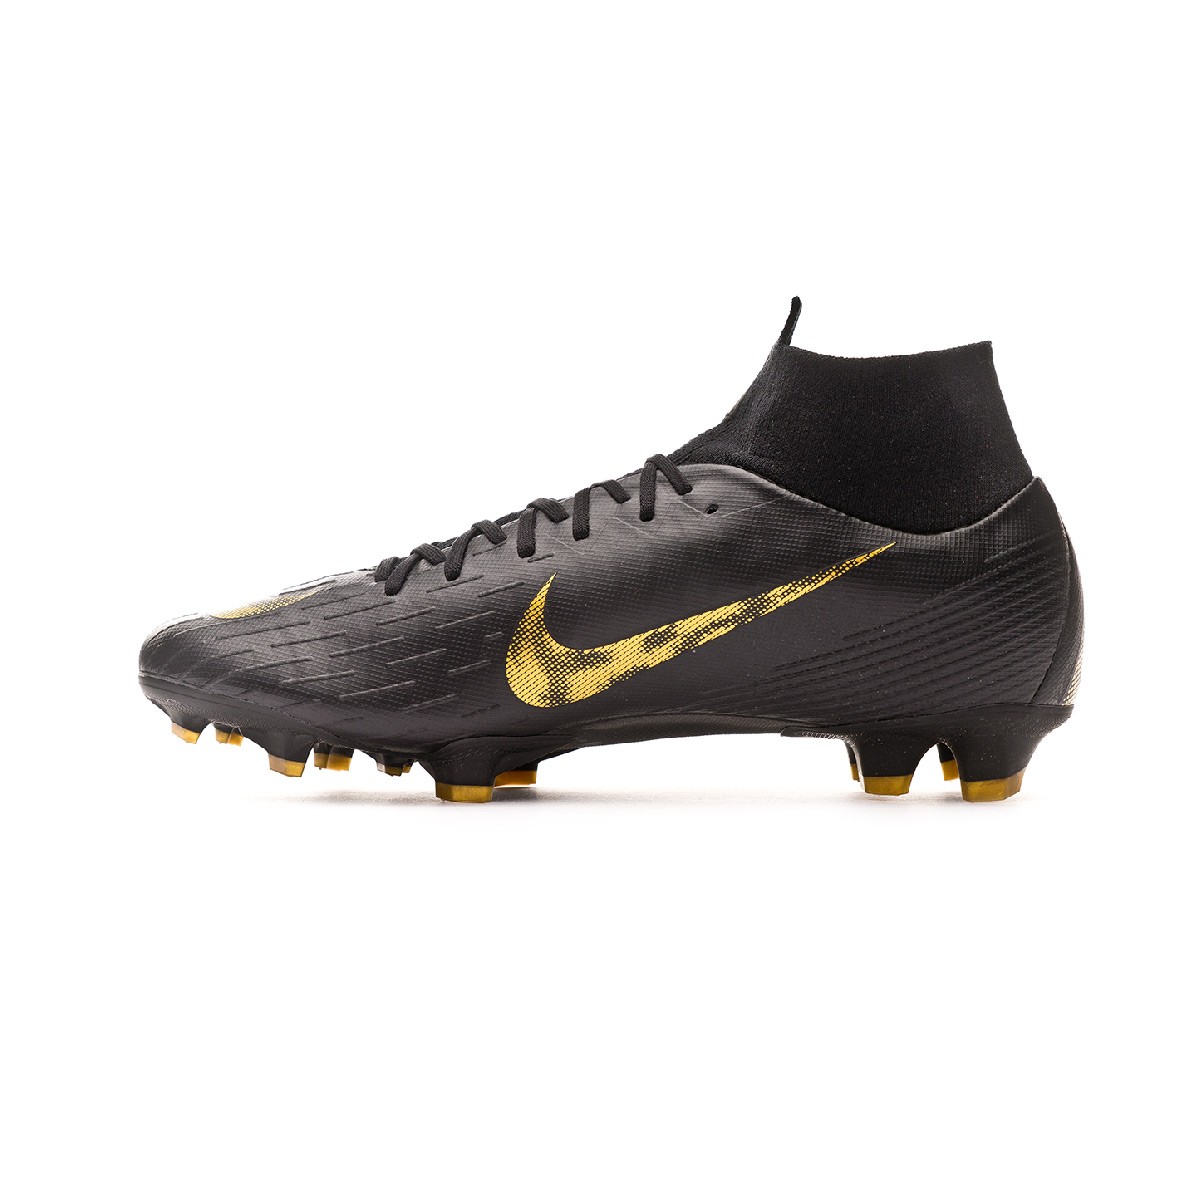 Nike Mercurial Superfly Vi Pro Fg Shoes for sale in Sitiawan.